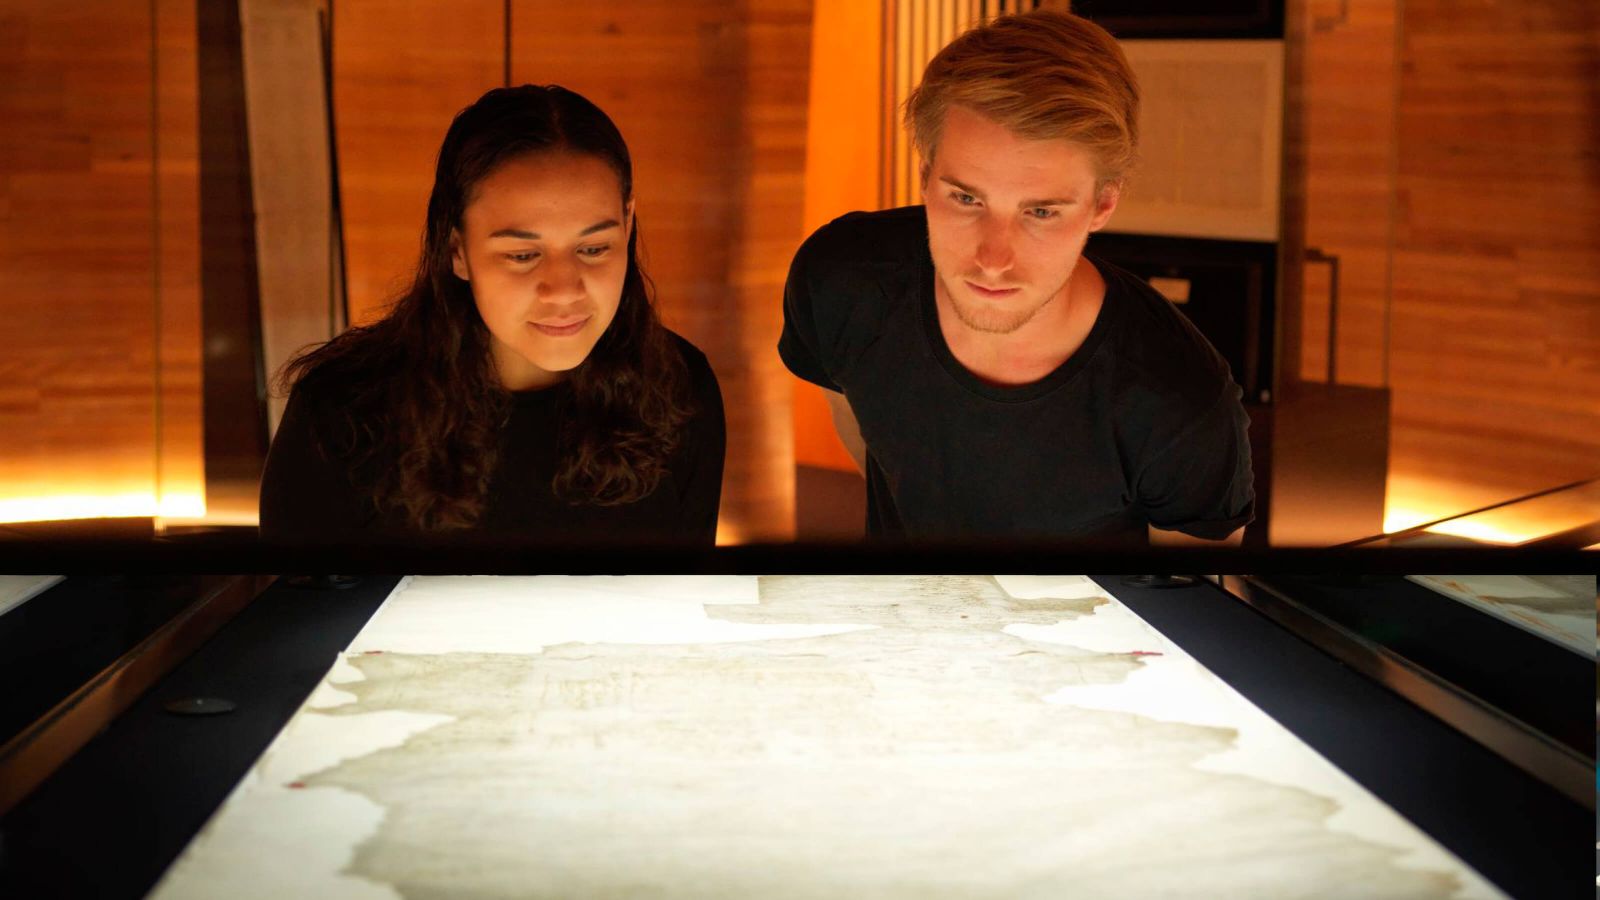 Two History students are looking down at the Treaty of Waitangi which is on display at the National Library of New Zealand, Wellington.